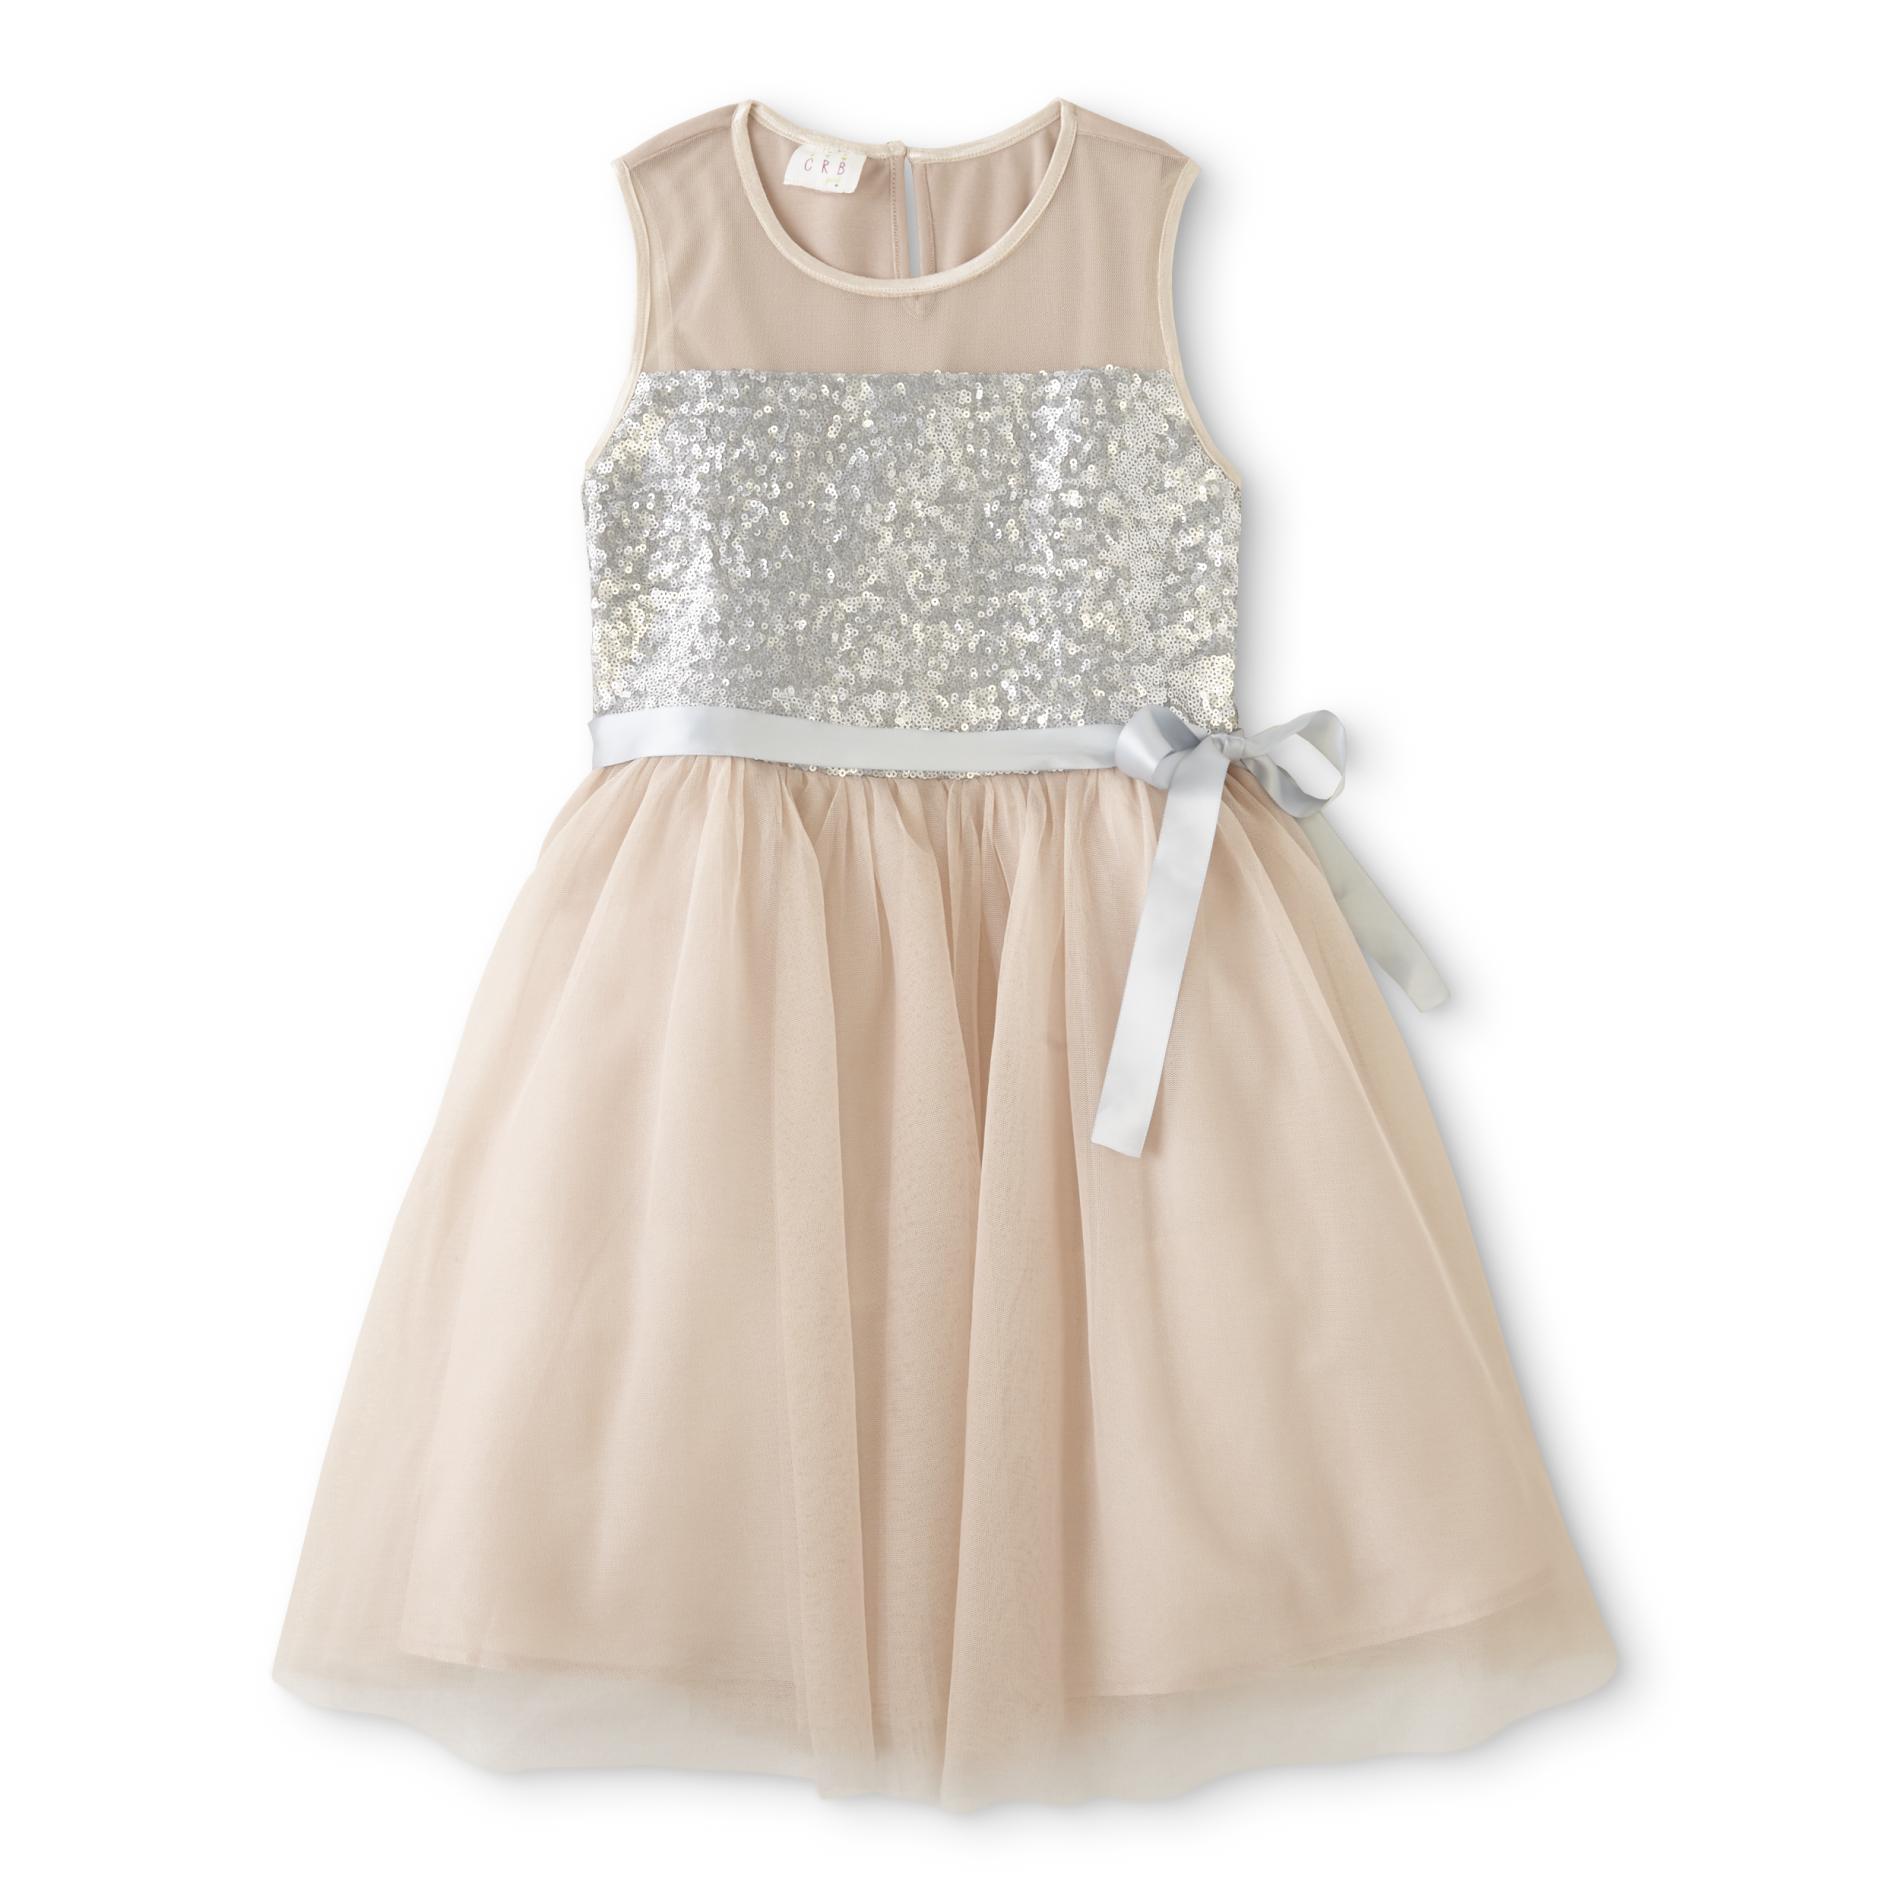 Canyon River Blues Girls' Embellished Occasion Dress